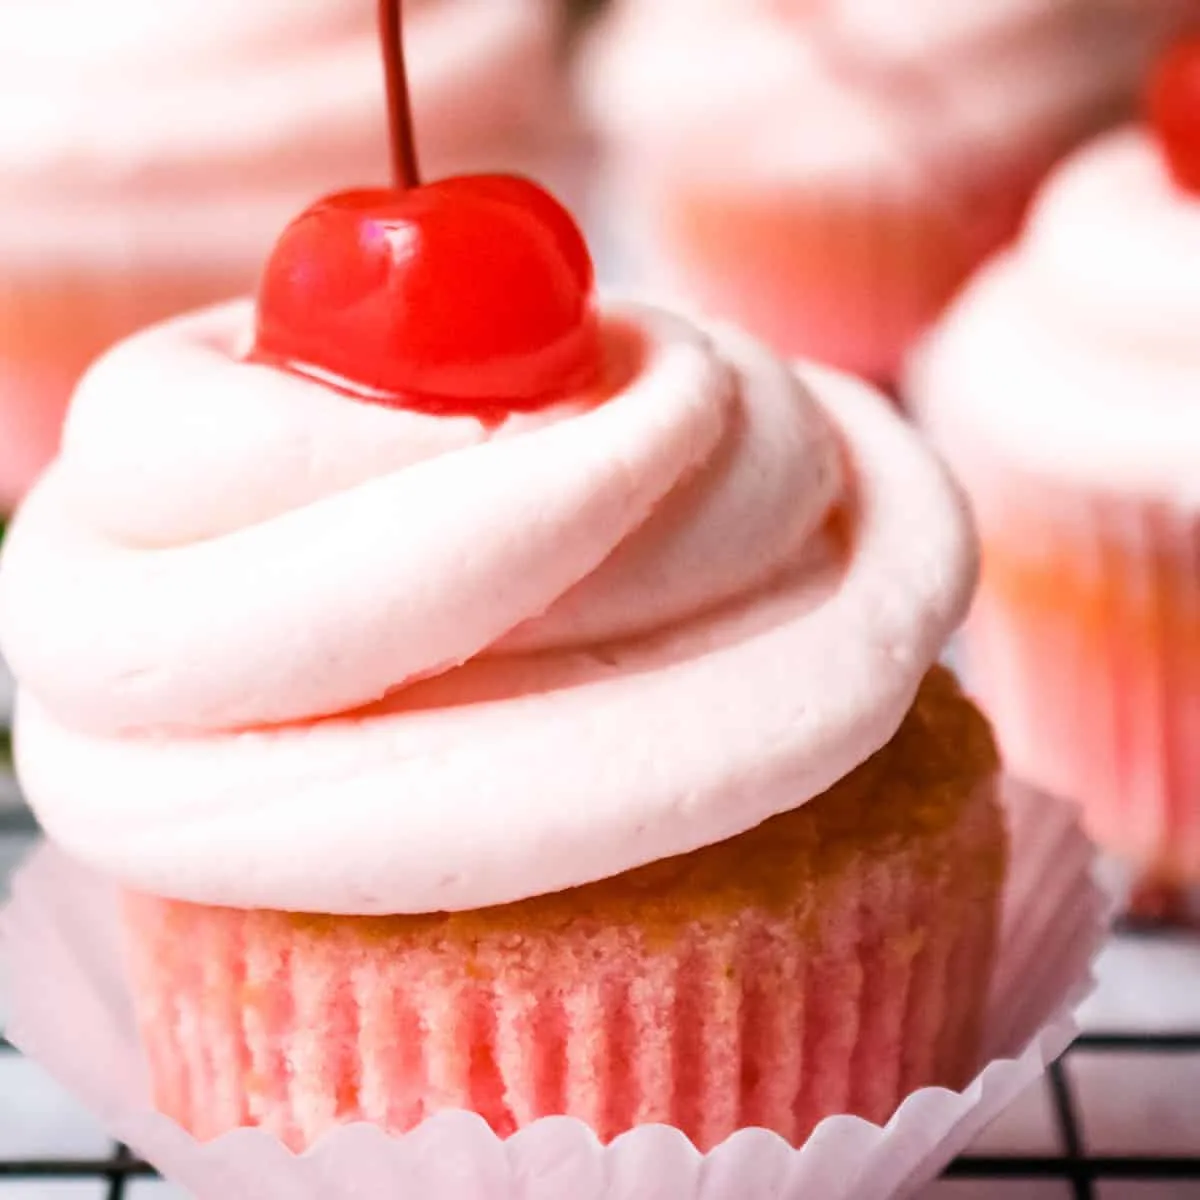 A cherry cupcake with cherry frosting and a maraschino cherry on top.